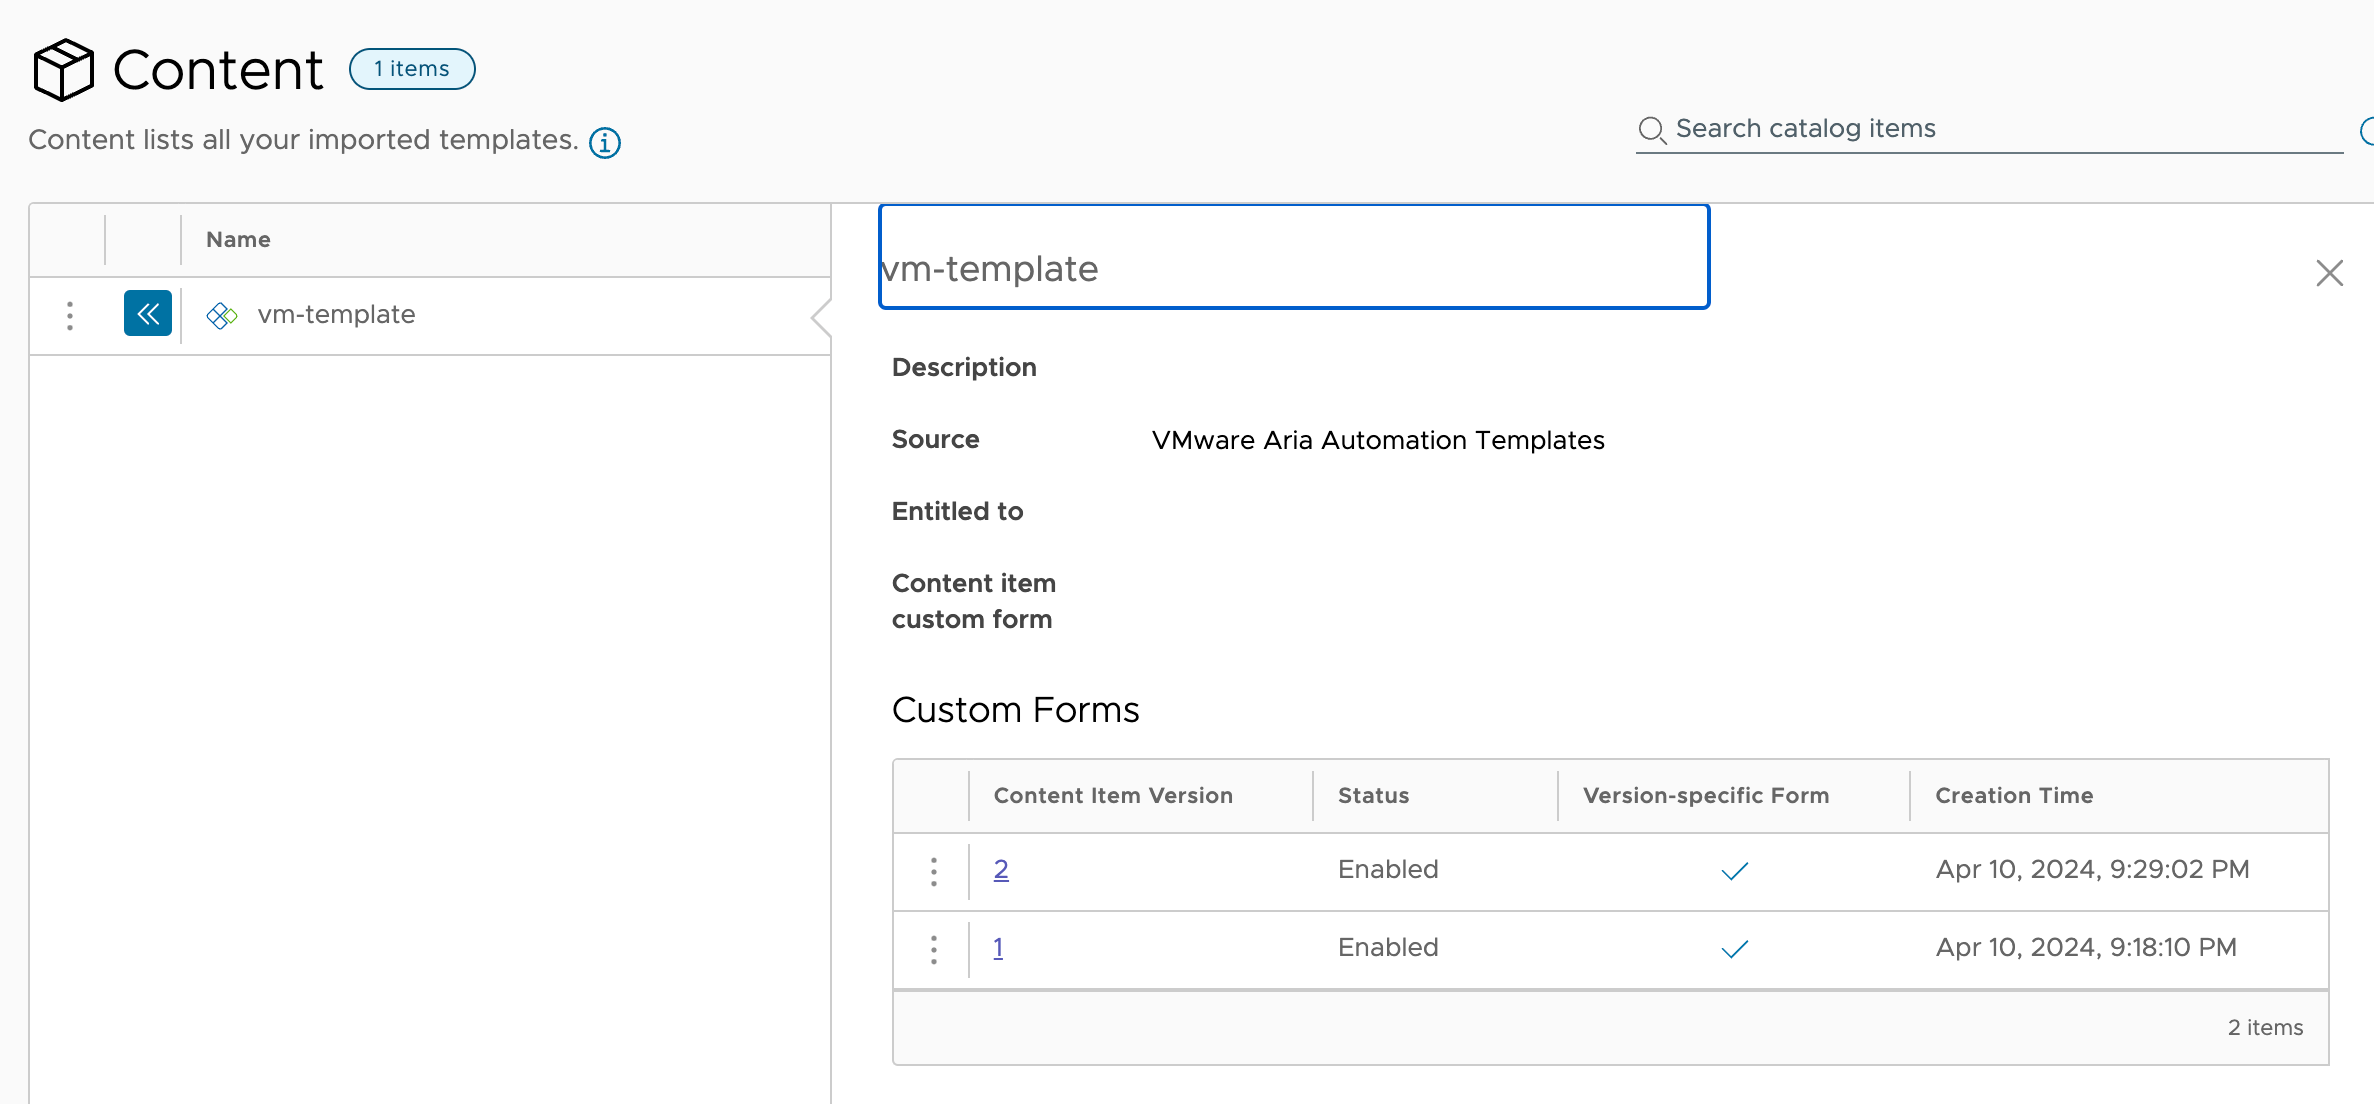 Custom Form added to version